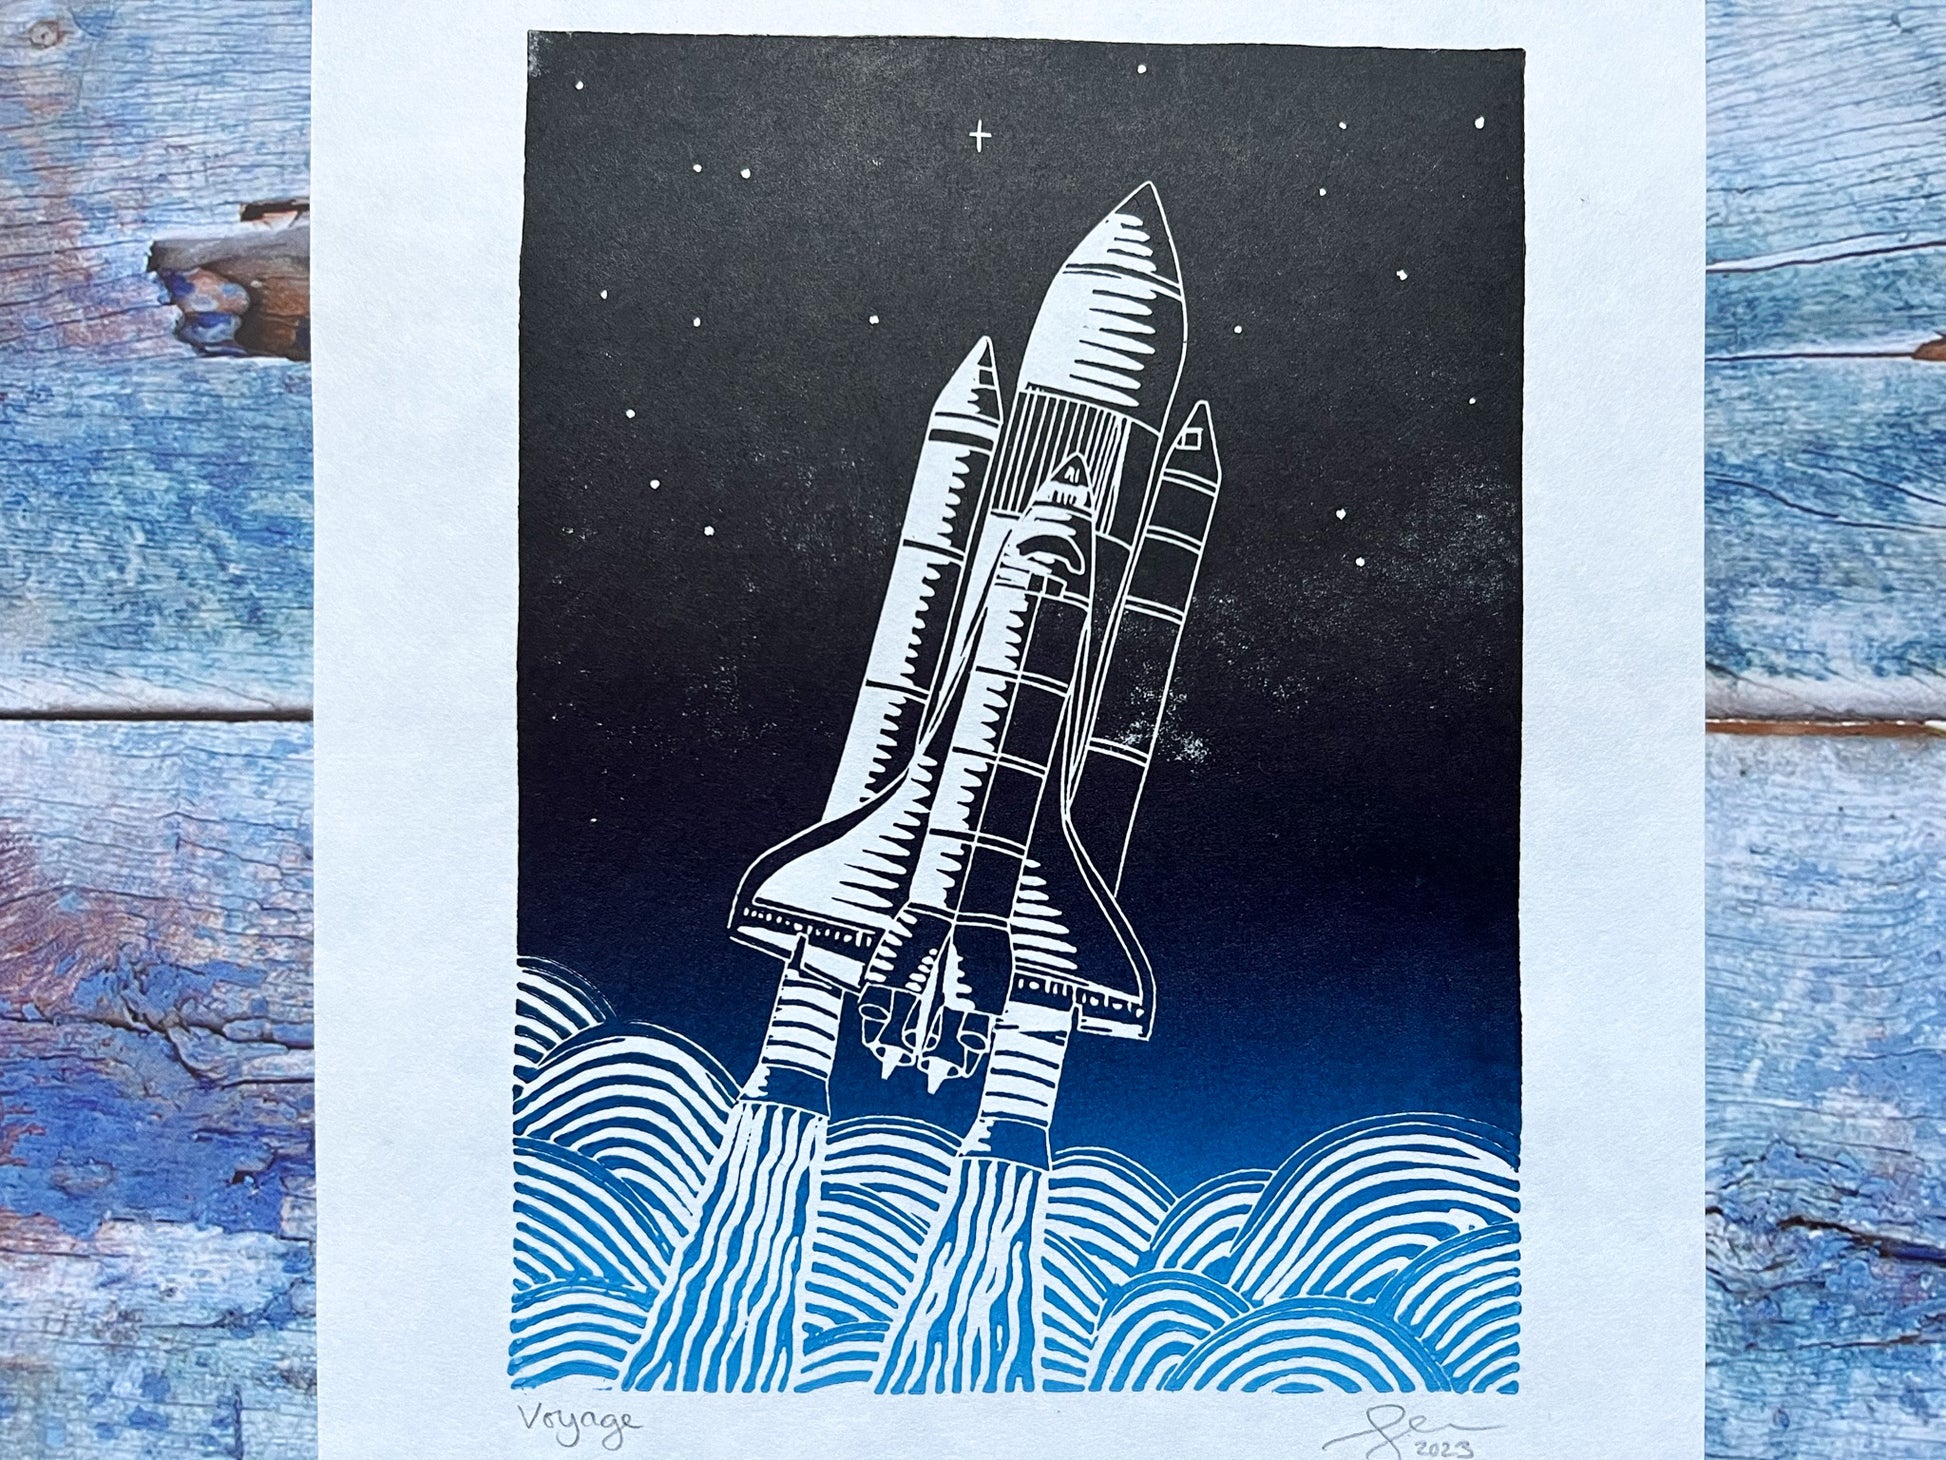 A close up of an A4 lino print with a light blue to black gradient or a space shuttled exiting earth's atmosphere